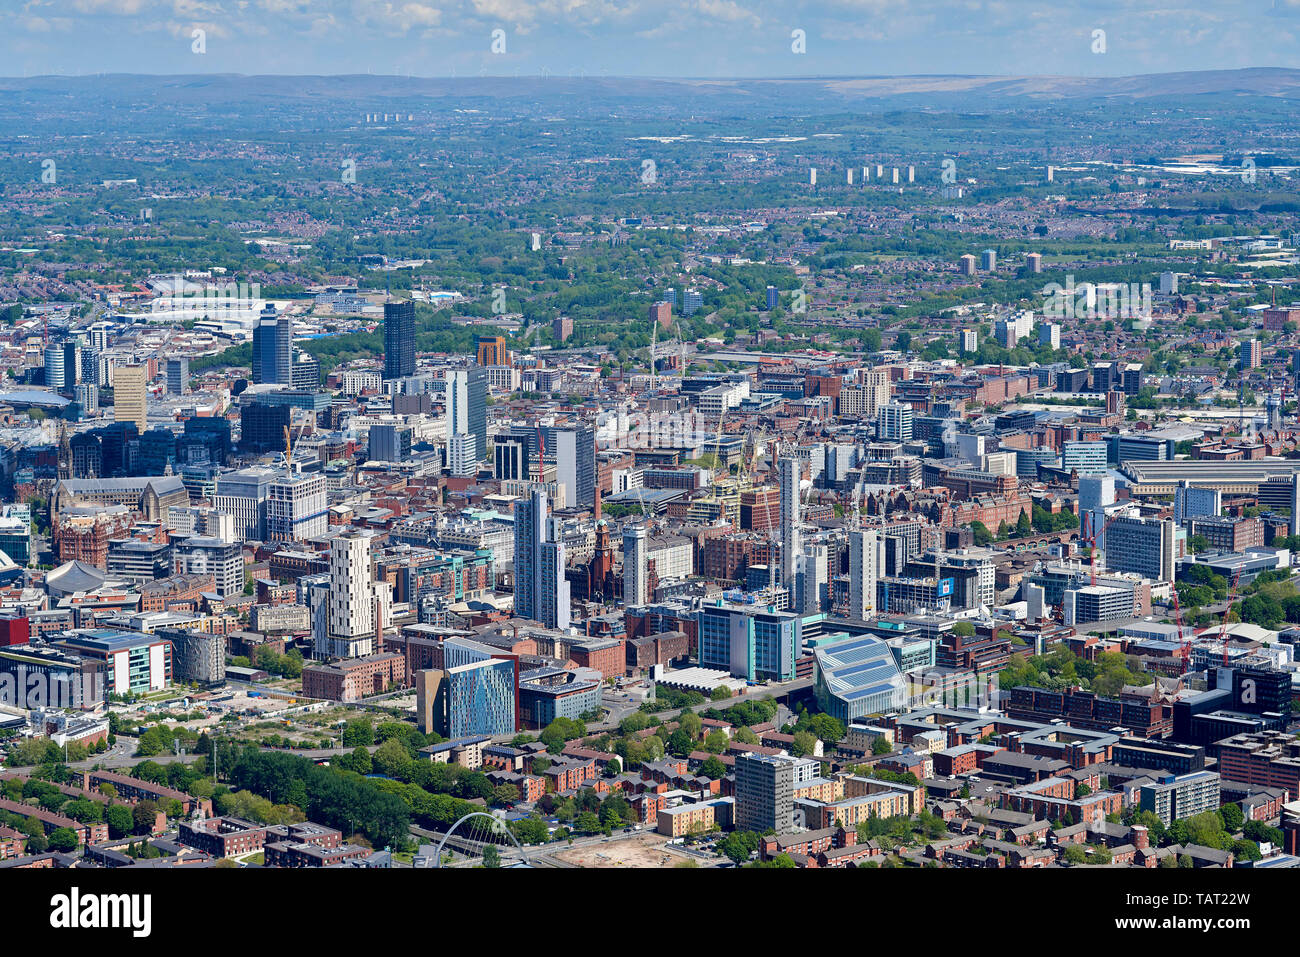 An aerial view of Manchester City Centre, North West England, UK Stock Photo